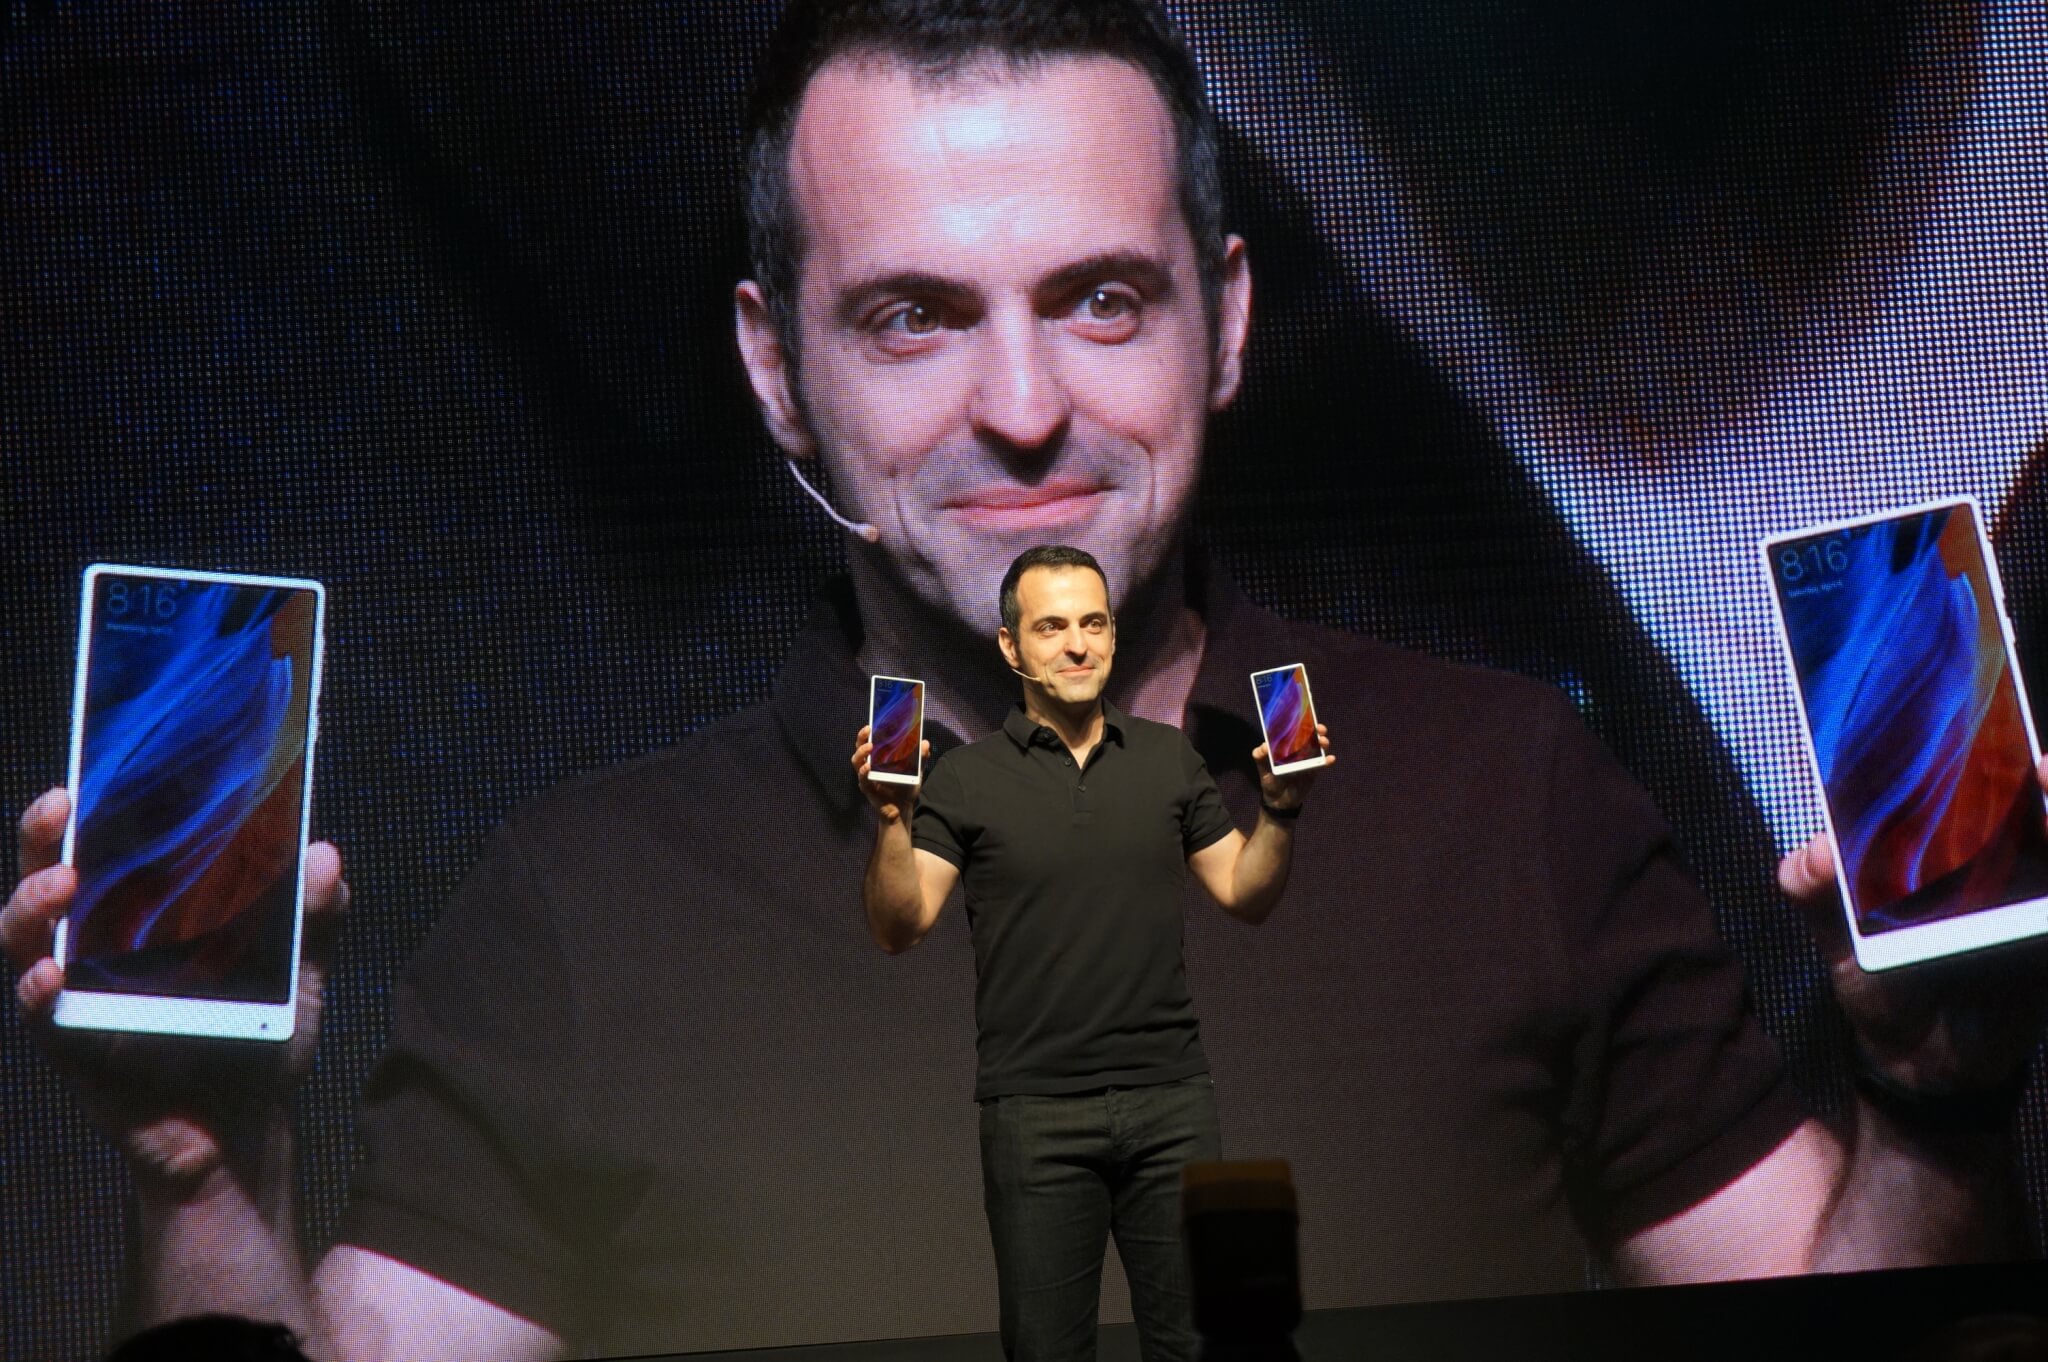 Xiaomi's Hugo Barra holds up the white version of the Mi Mix smartphone.